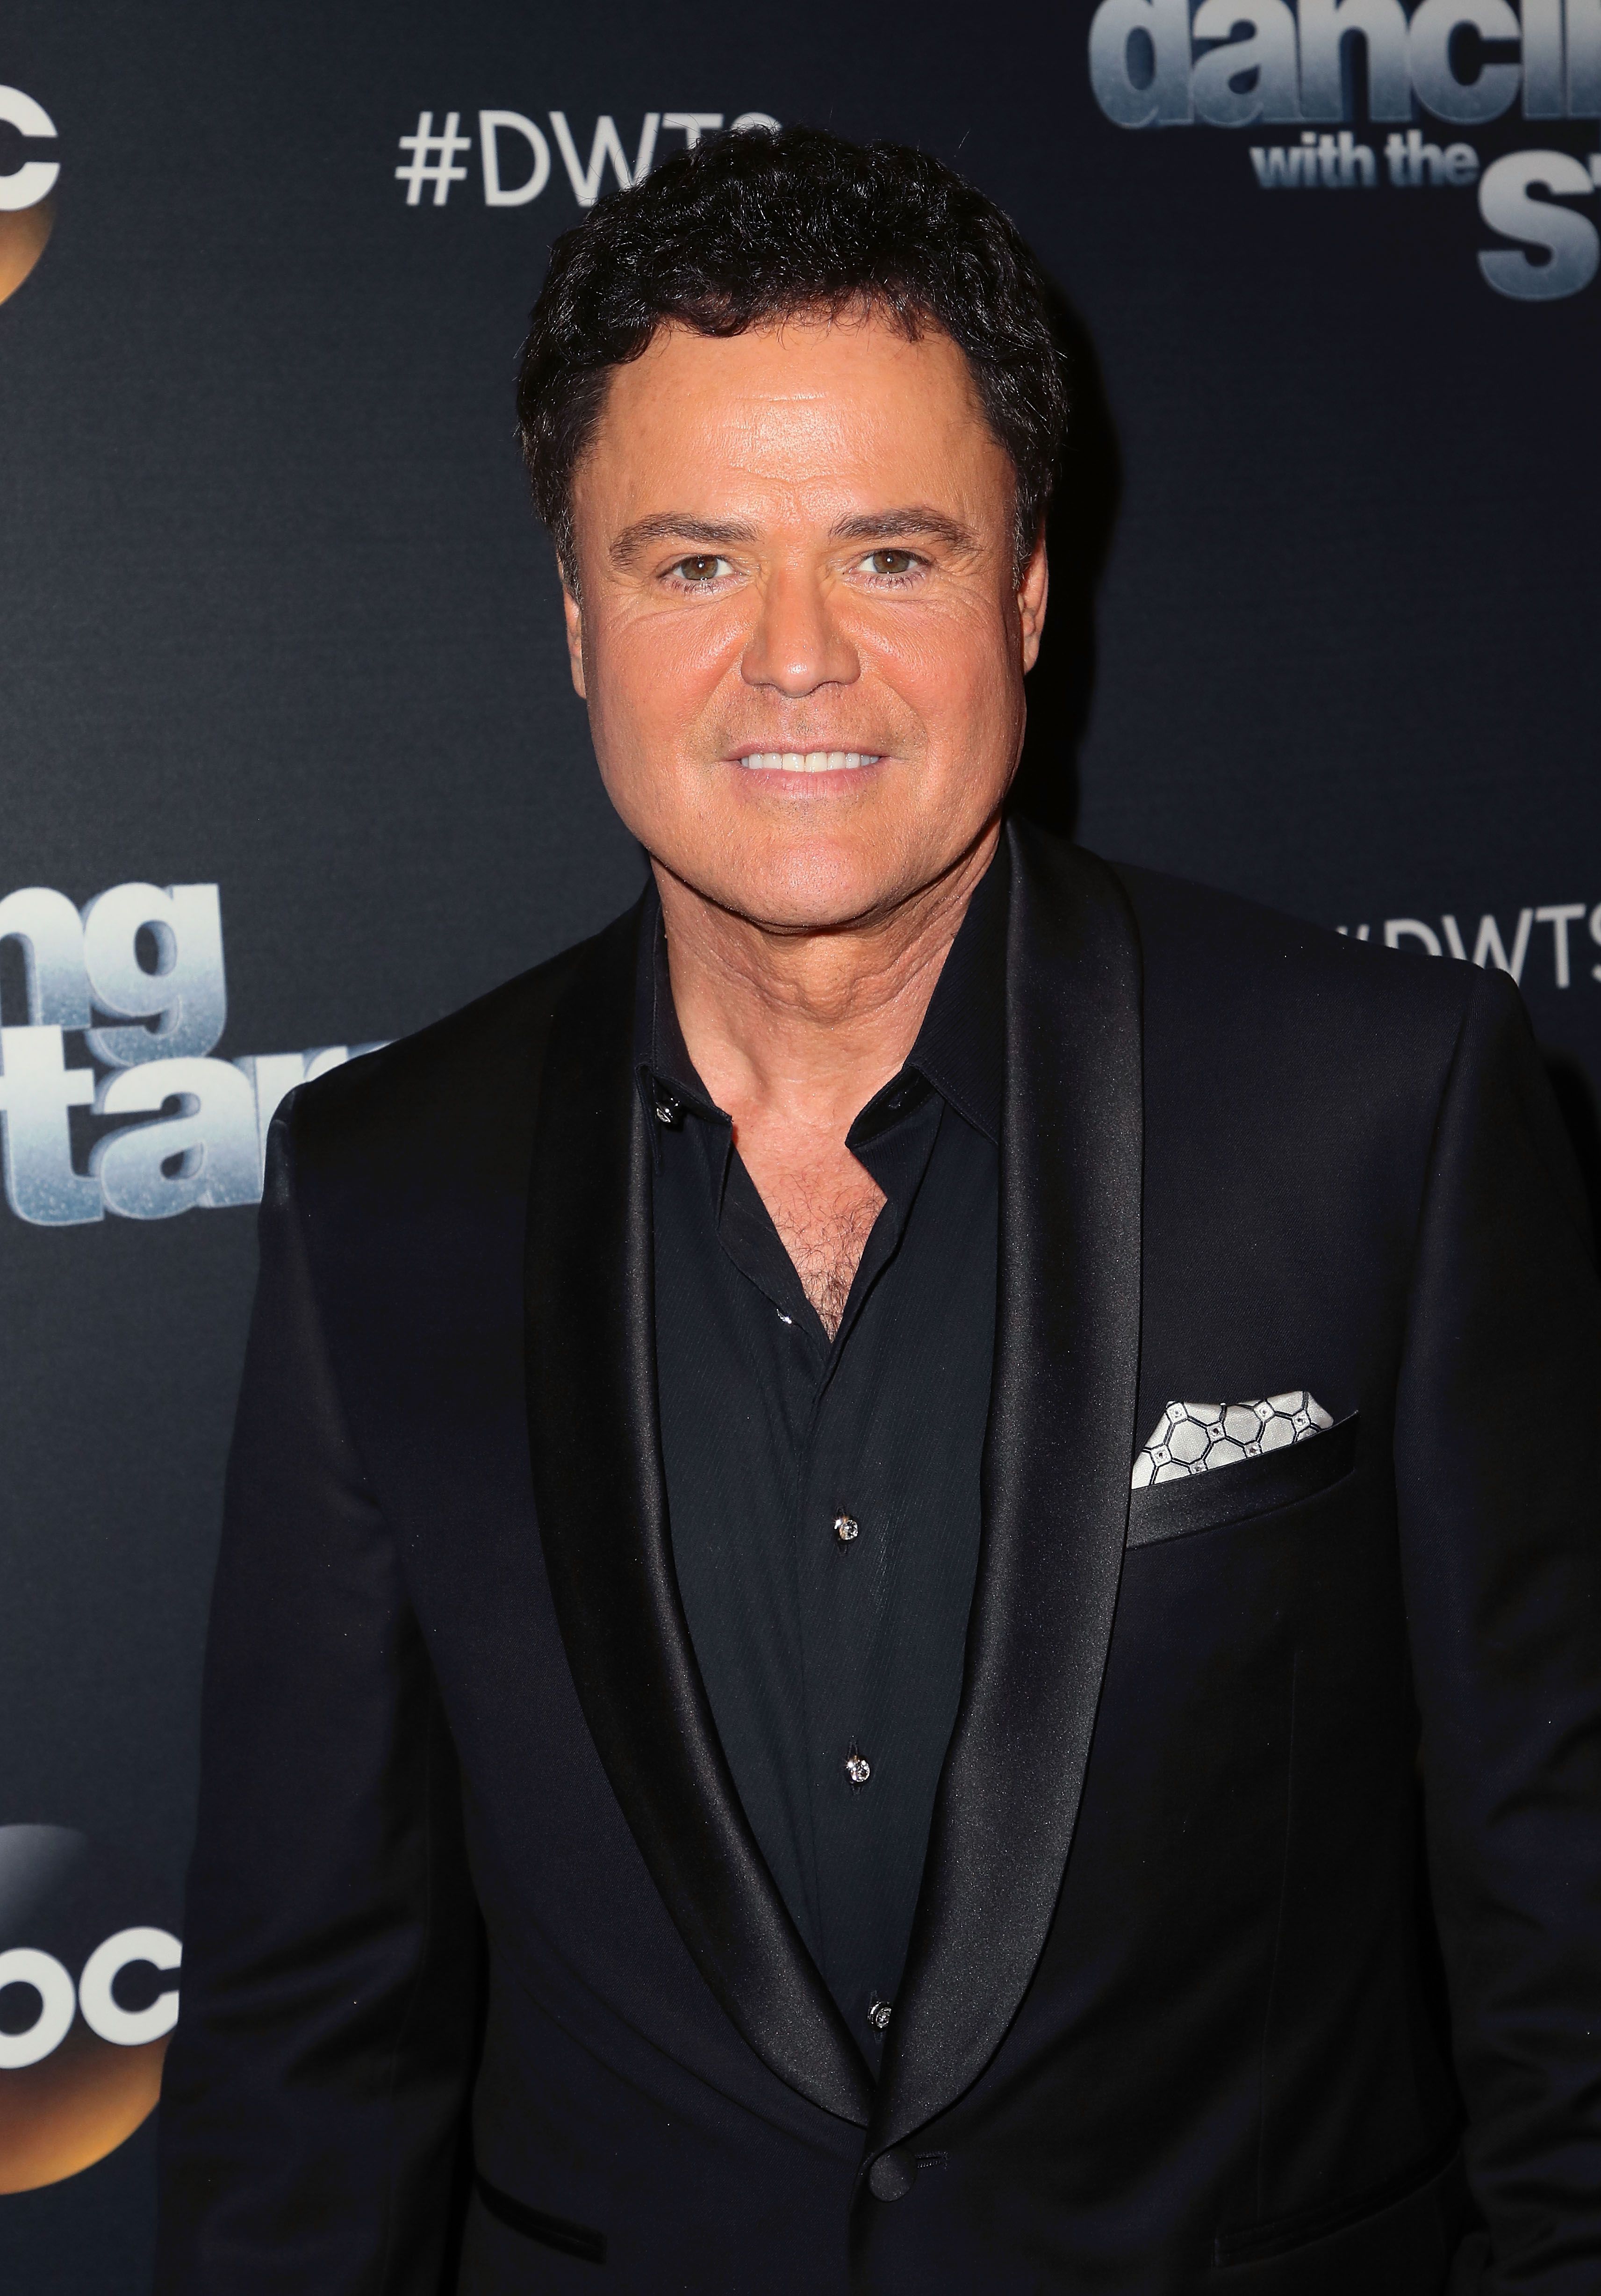 Donny Osmond poses at "Dancing with the Stars" Season 27 at CBS Televison City on October 2, 2018 in Los Angeles, California | Photo: Getty Images